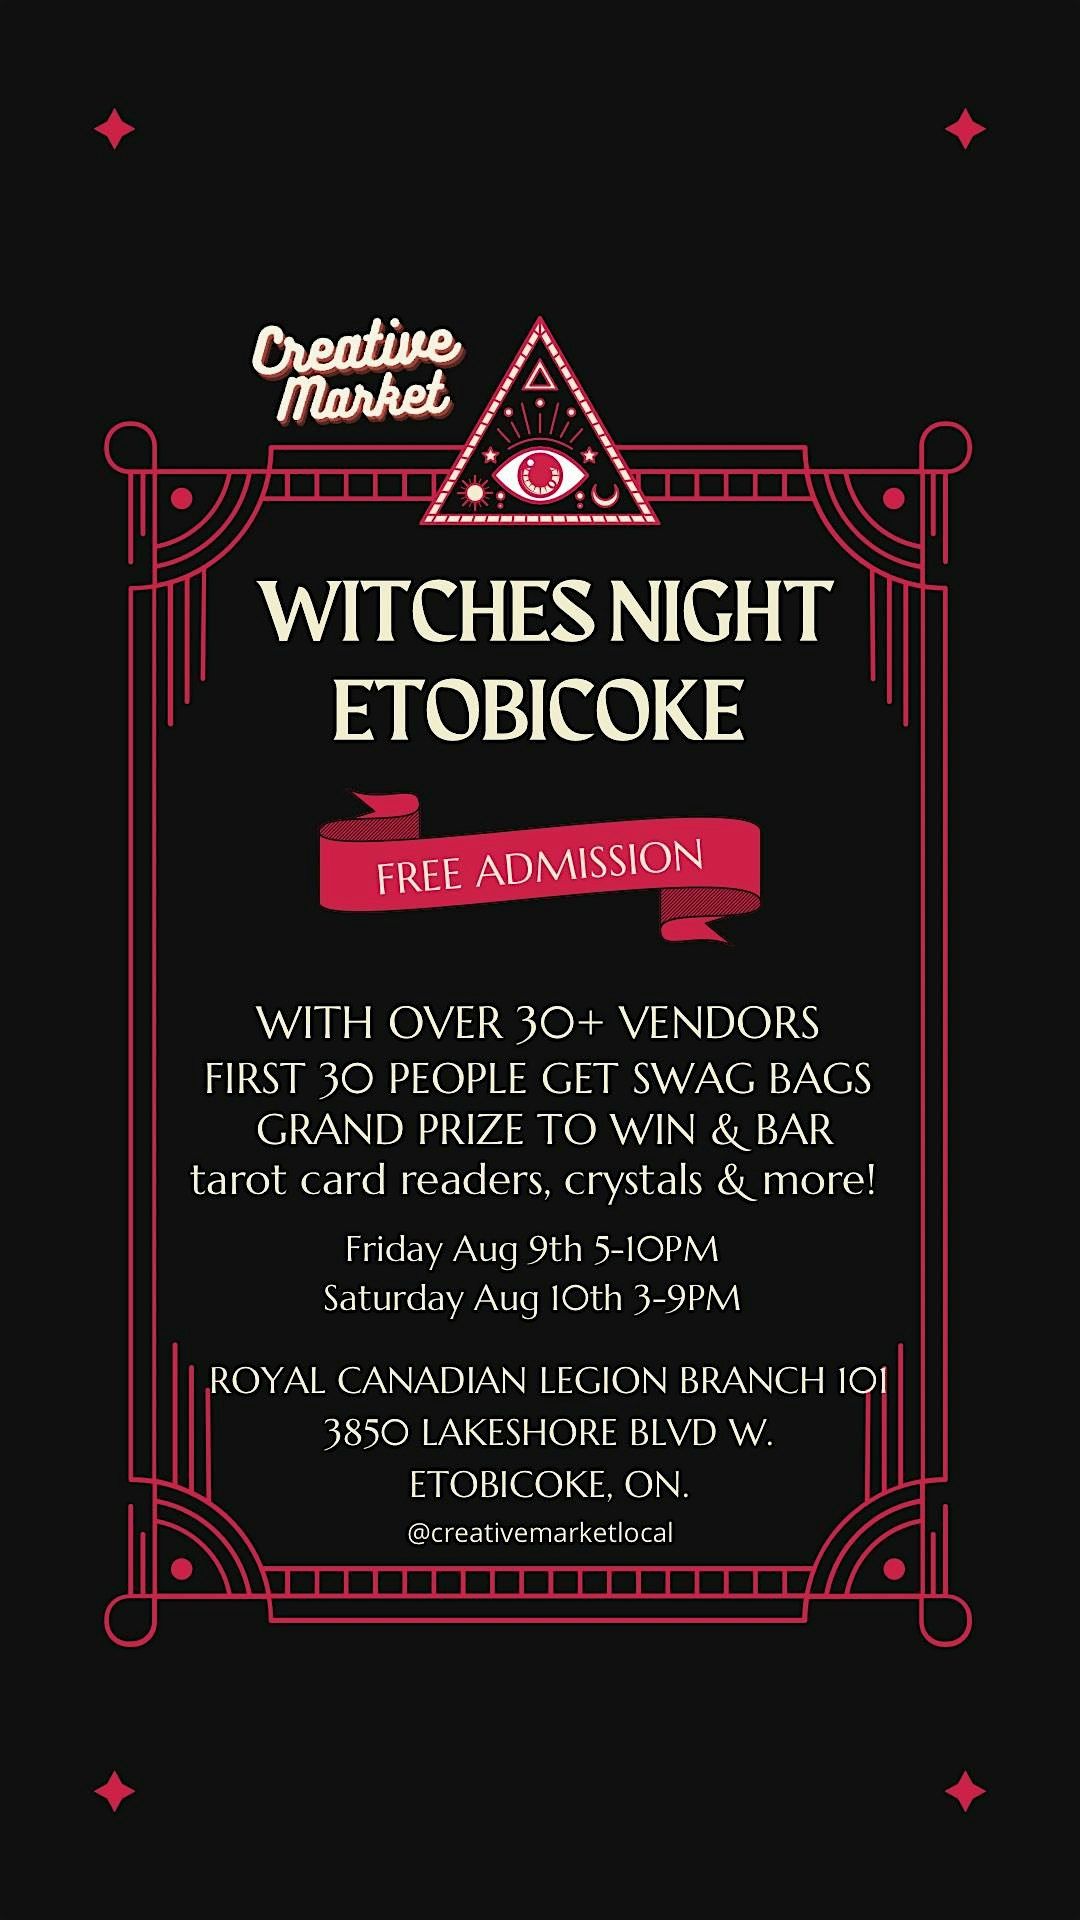 WITCHES NIGHT IN  \/ $50 TATTOO'S, 50+ VENDORS & MORE